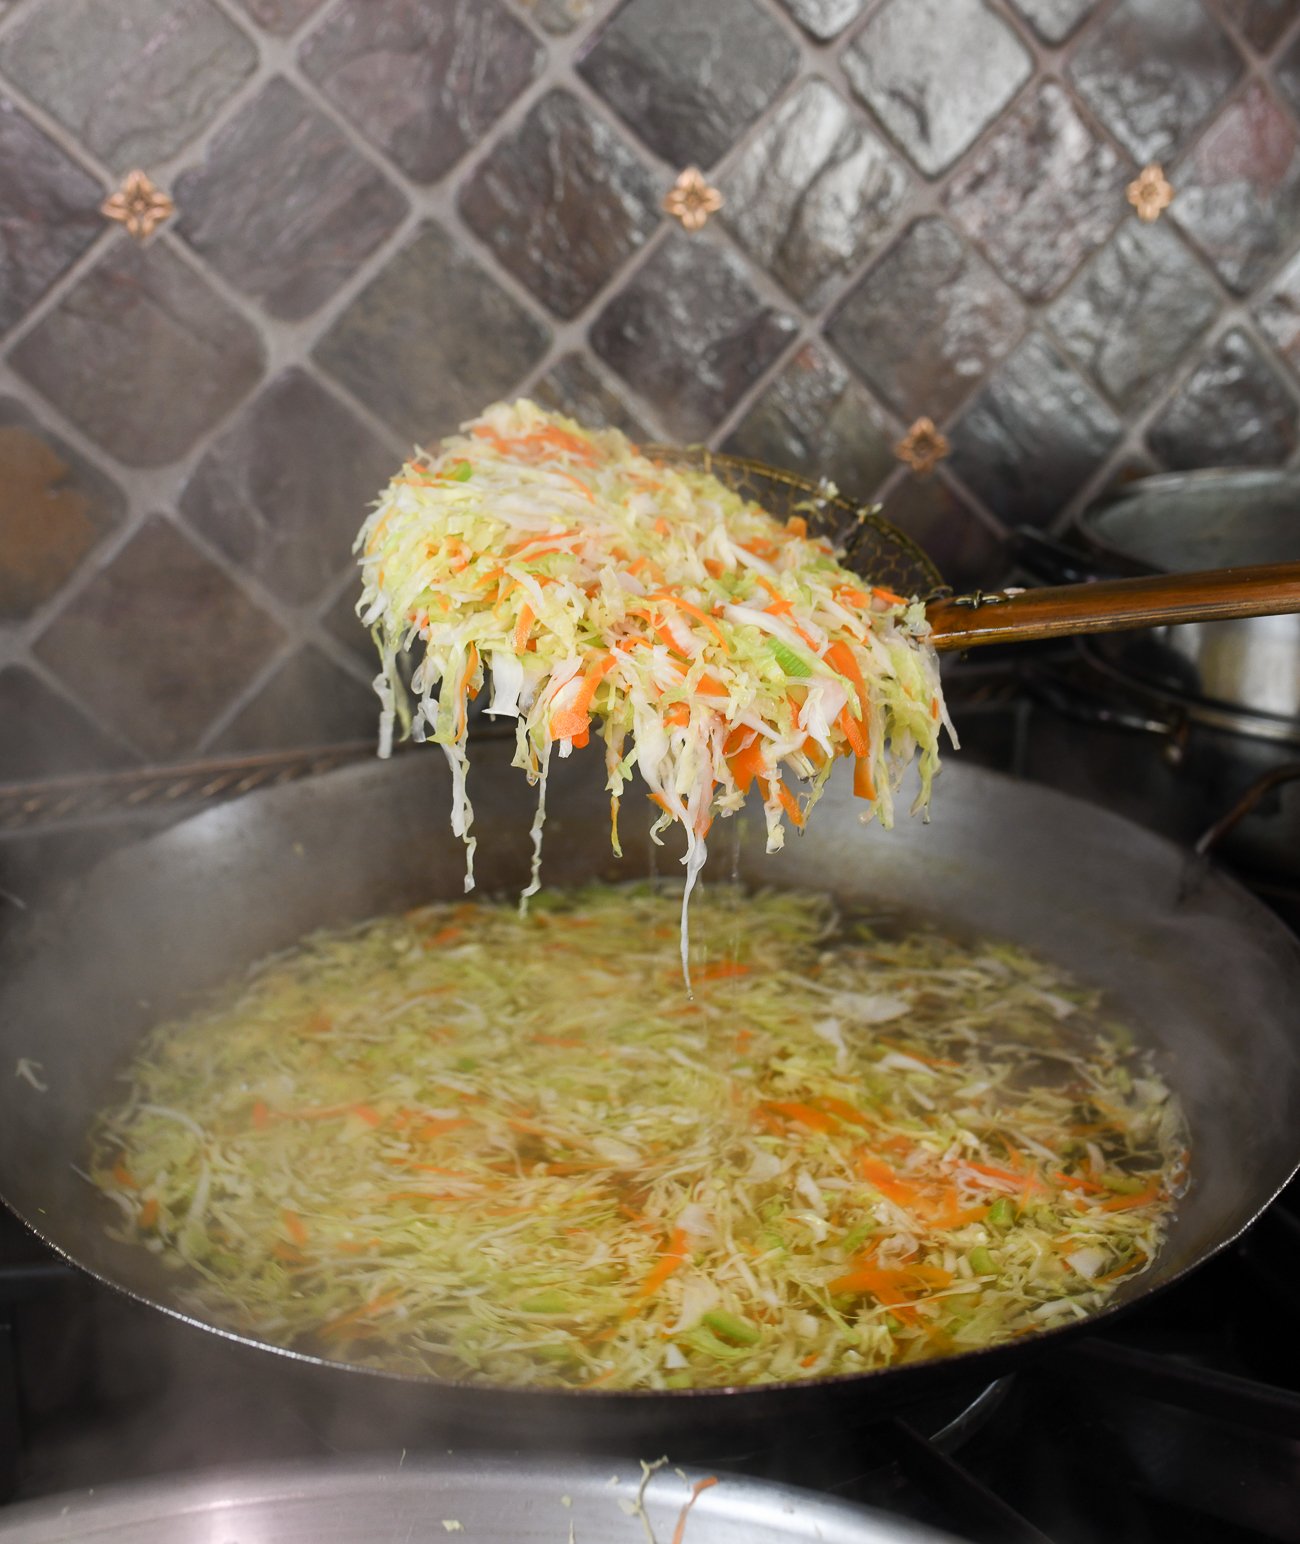 blanching shredded cabbage, carrots and celery in wok